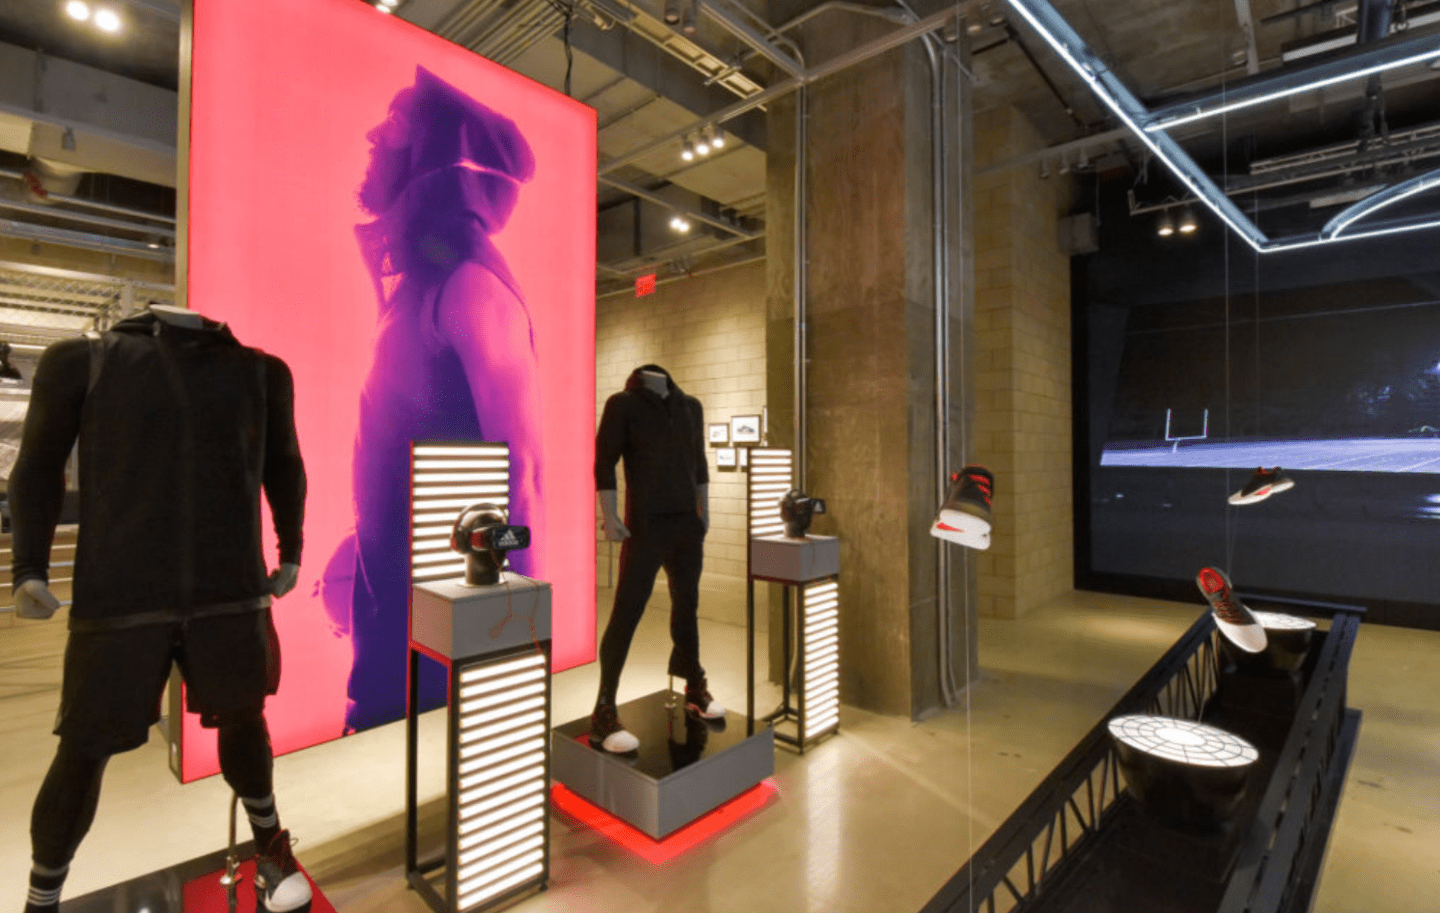 I Compared the Nike and Adidas Flagship Stores in NYC